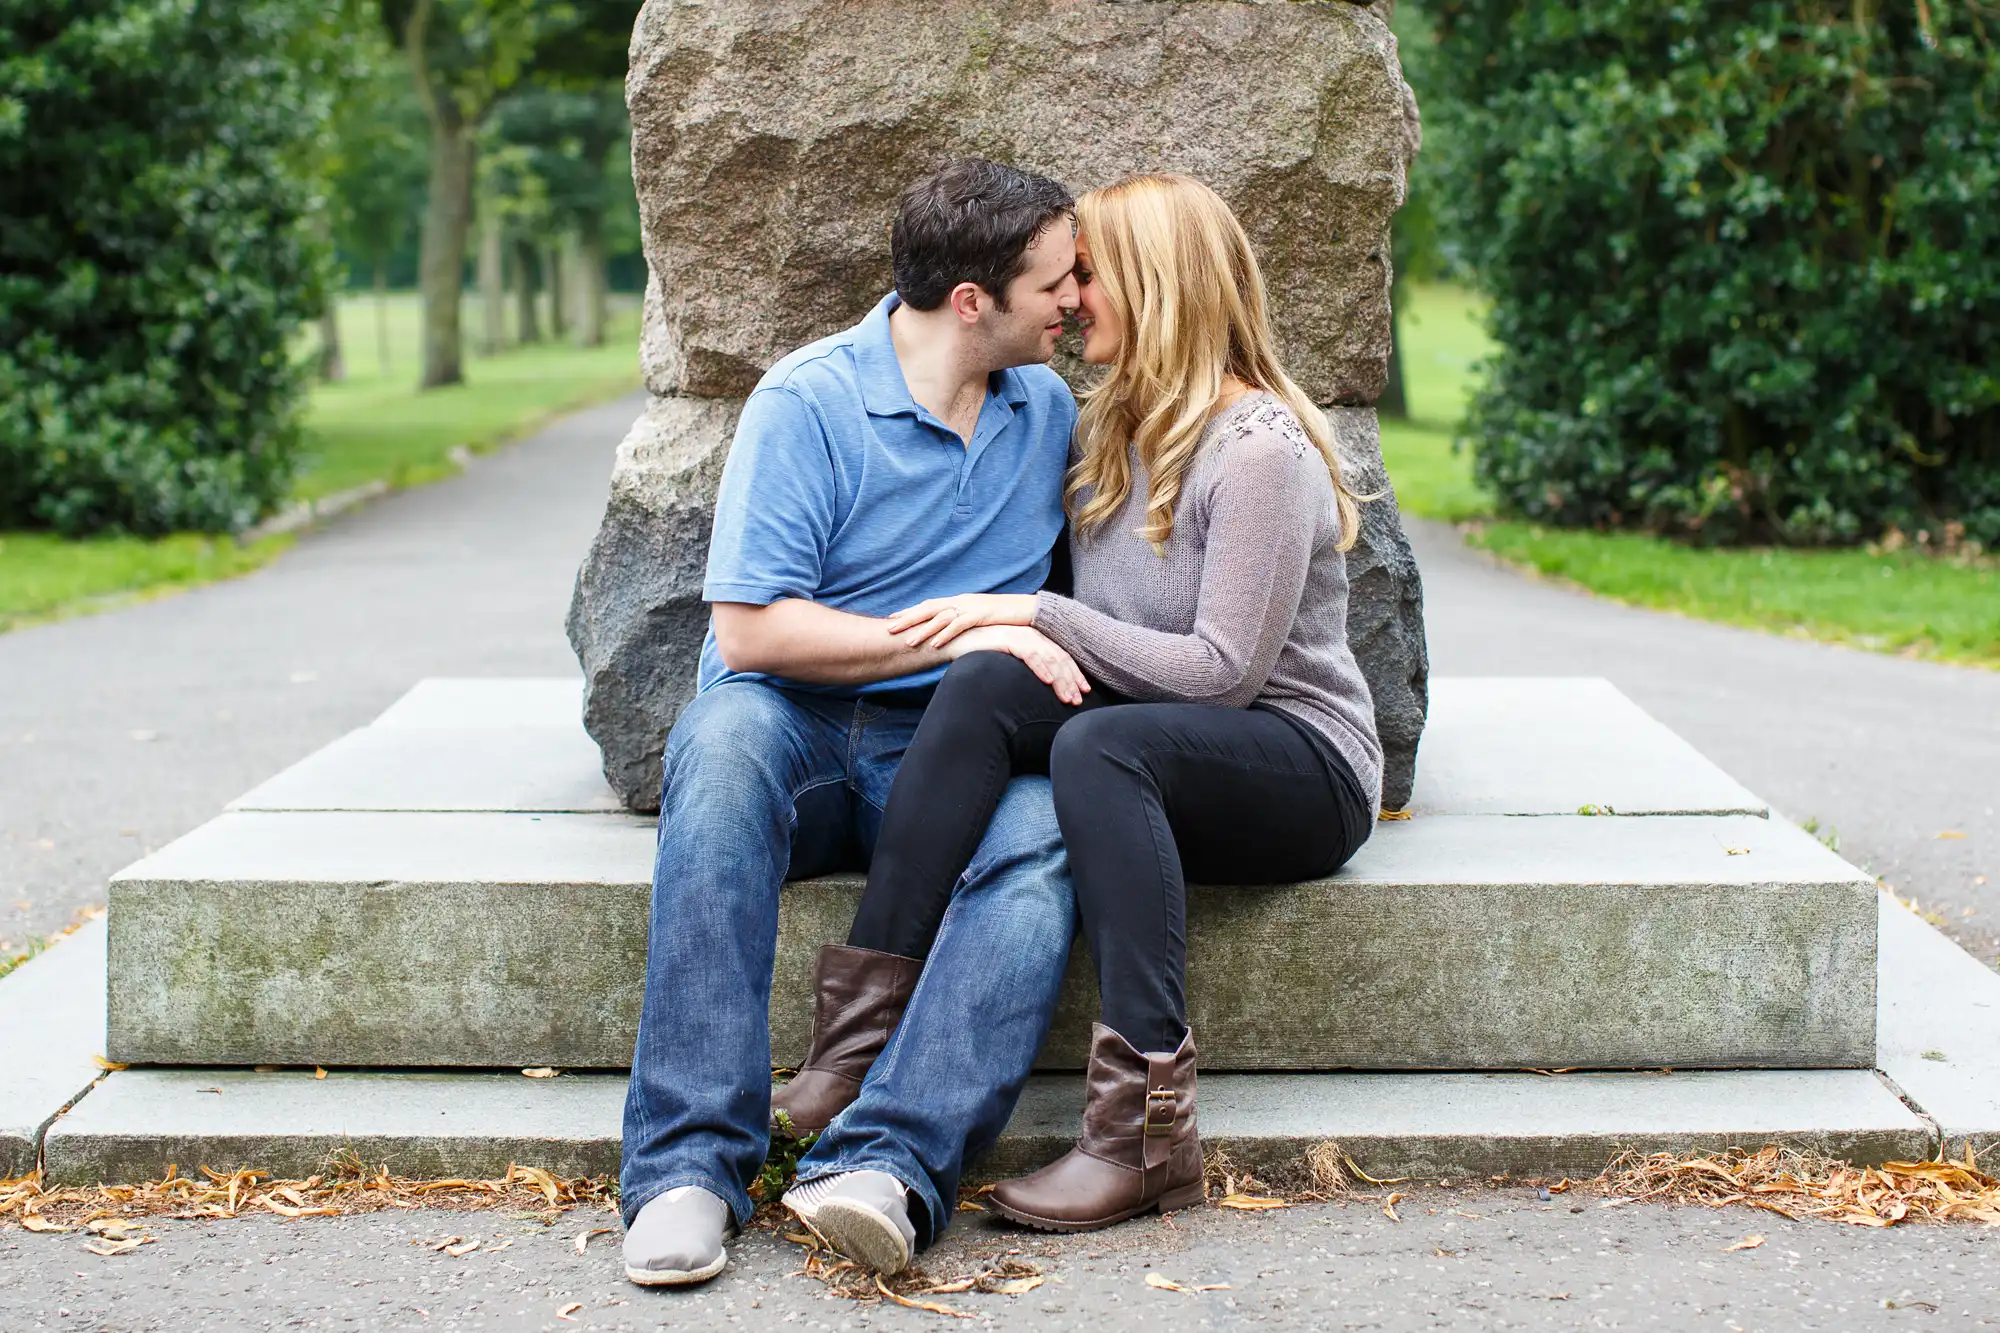 A couple sitting close and kissing on a bench in a park with a large stone structure behind them and trees along the pathway.